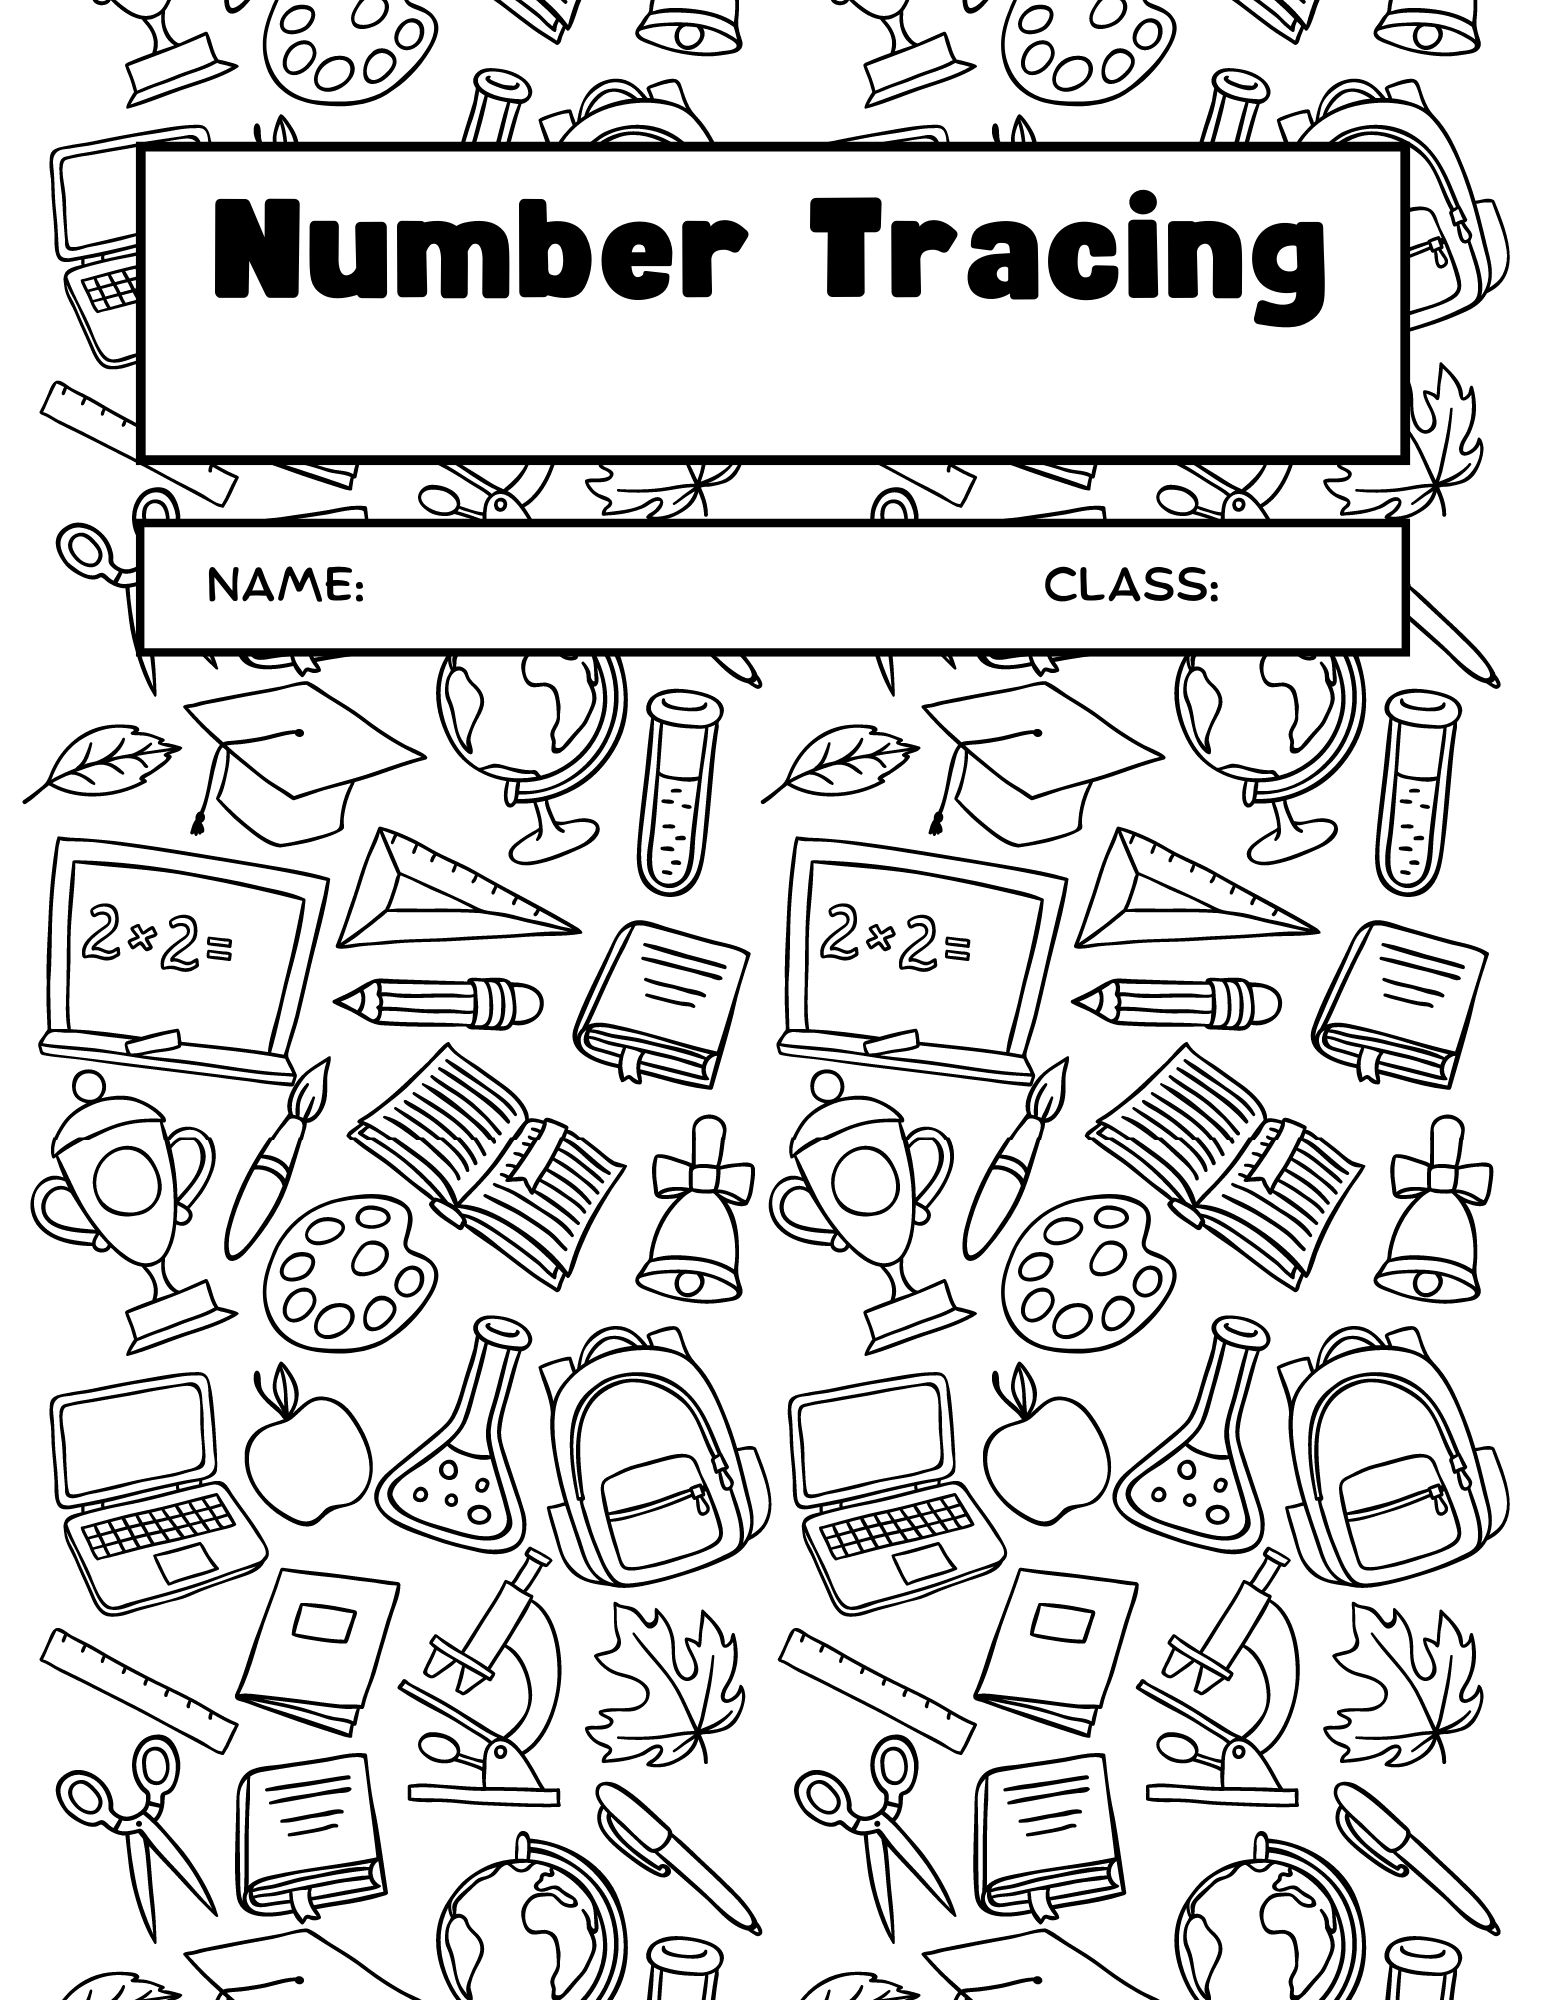 Number Tracing 1-9